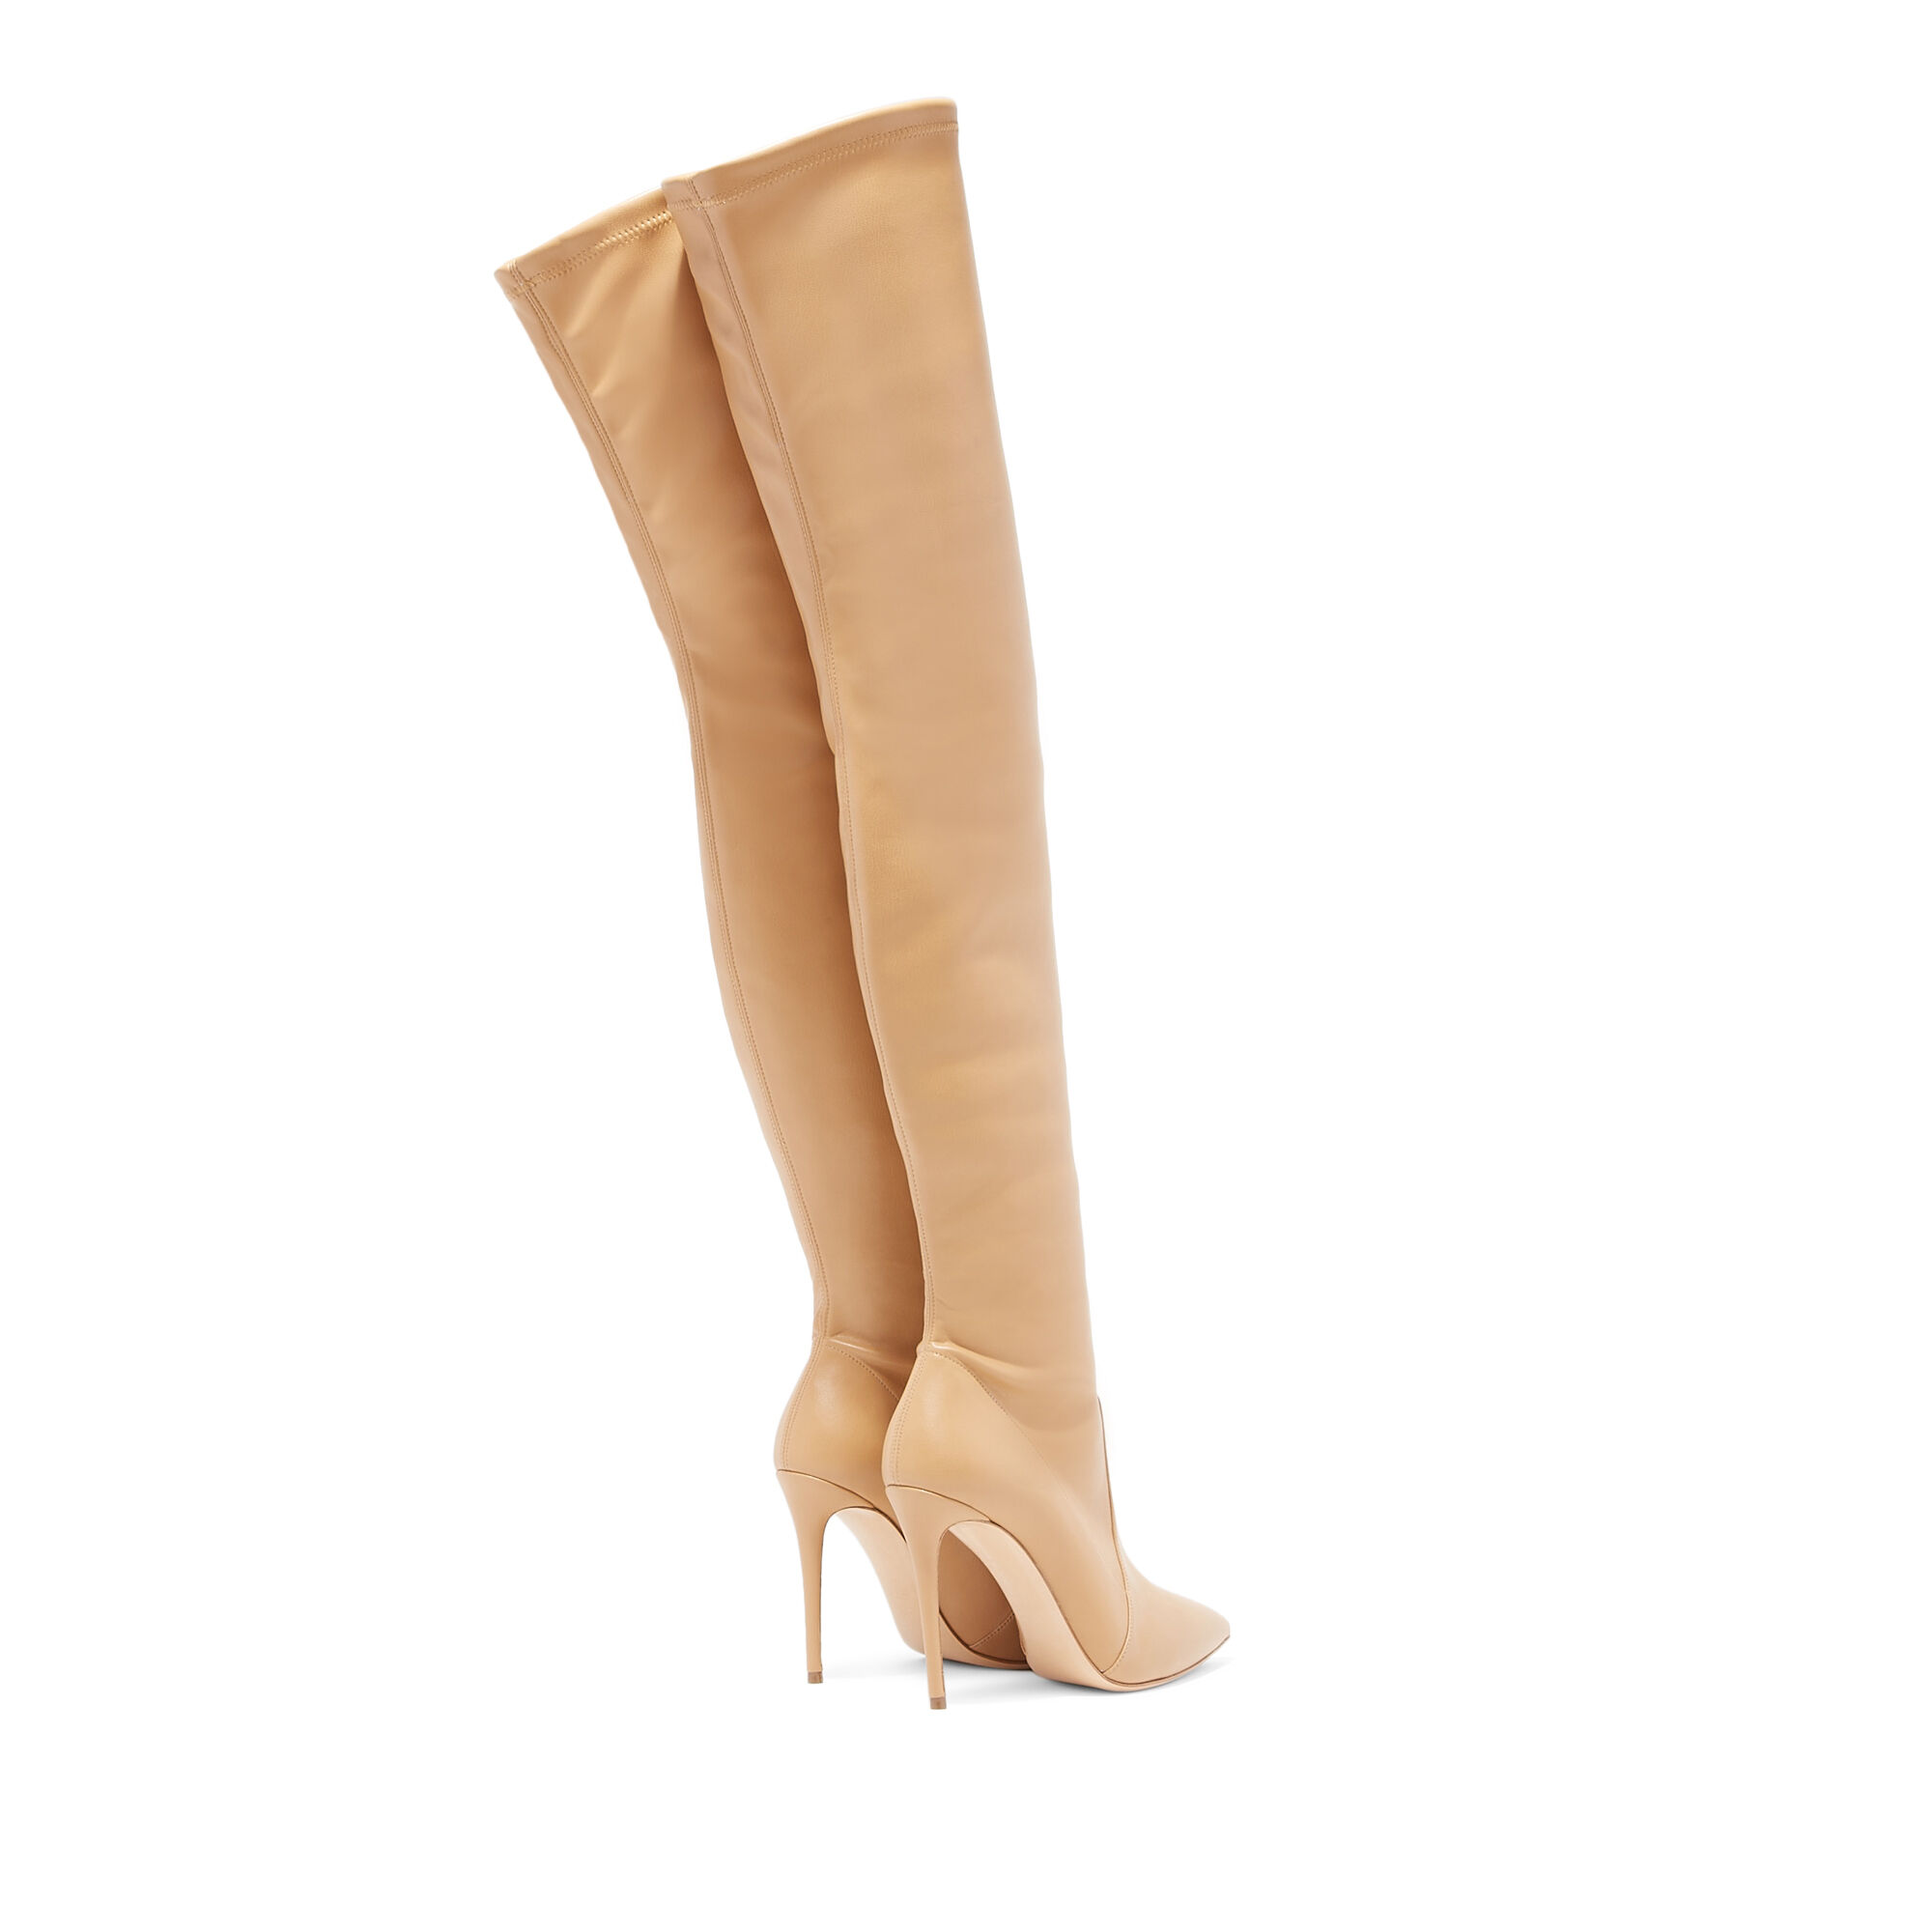 Julia Eco Leather Over The Knee Boots Over the Knee Boots in Camel